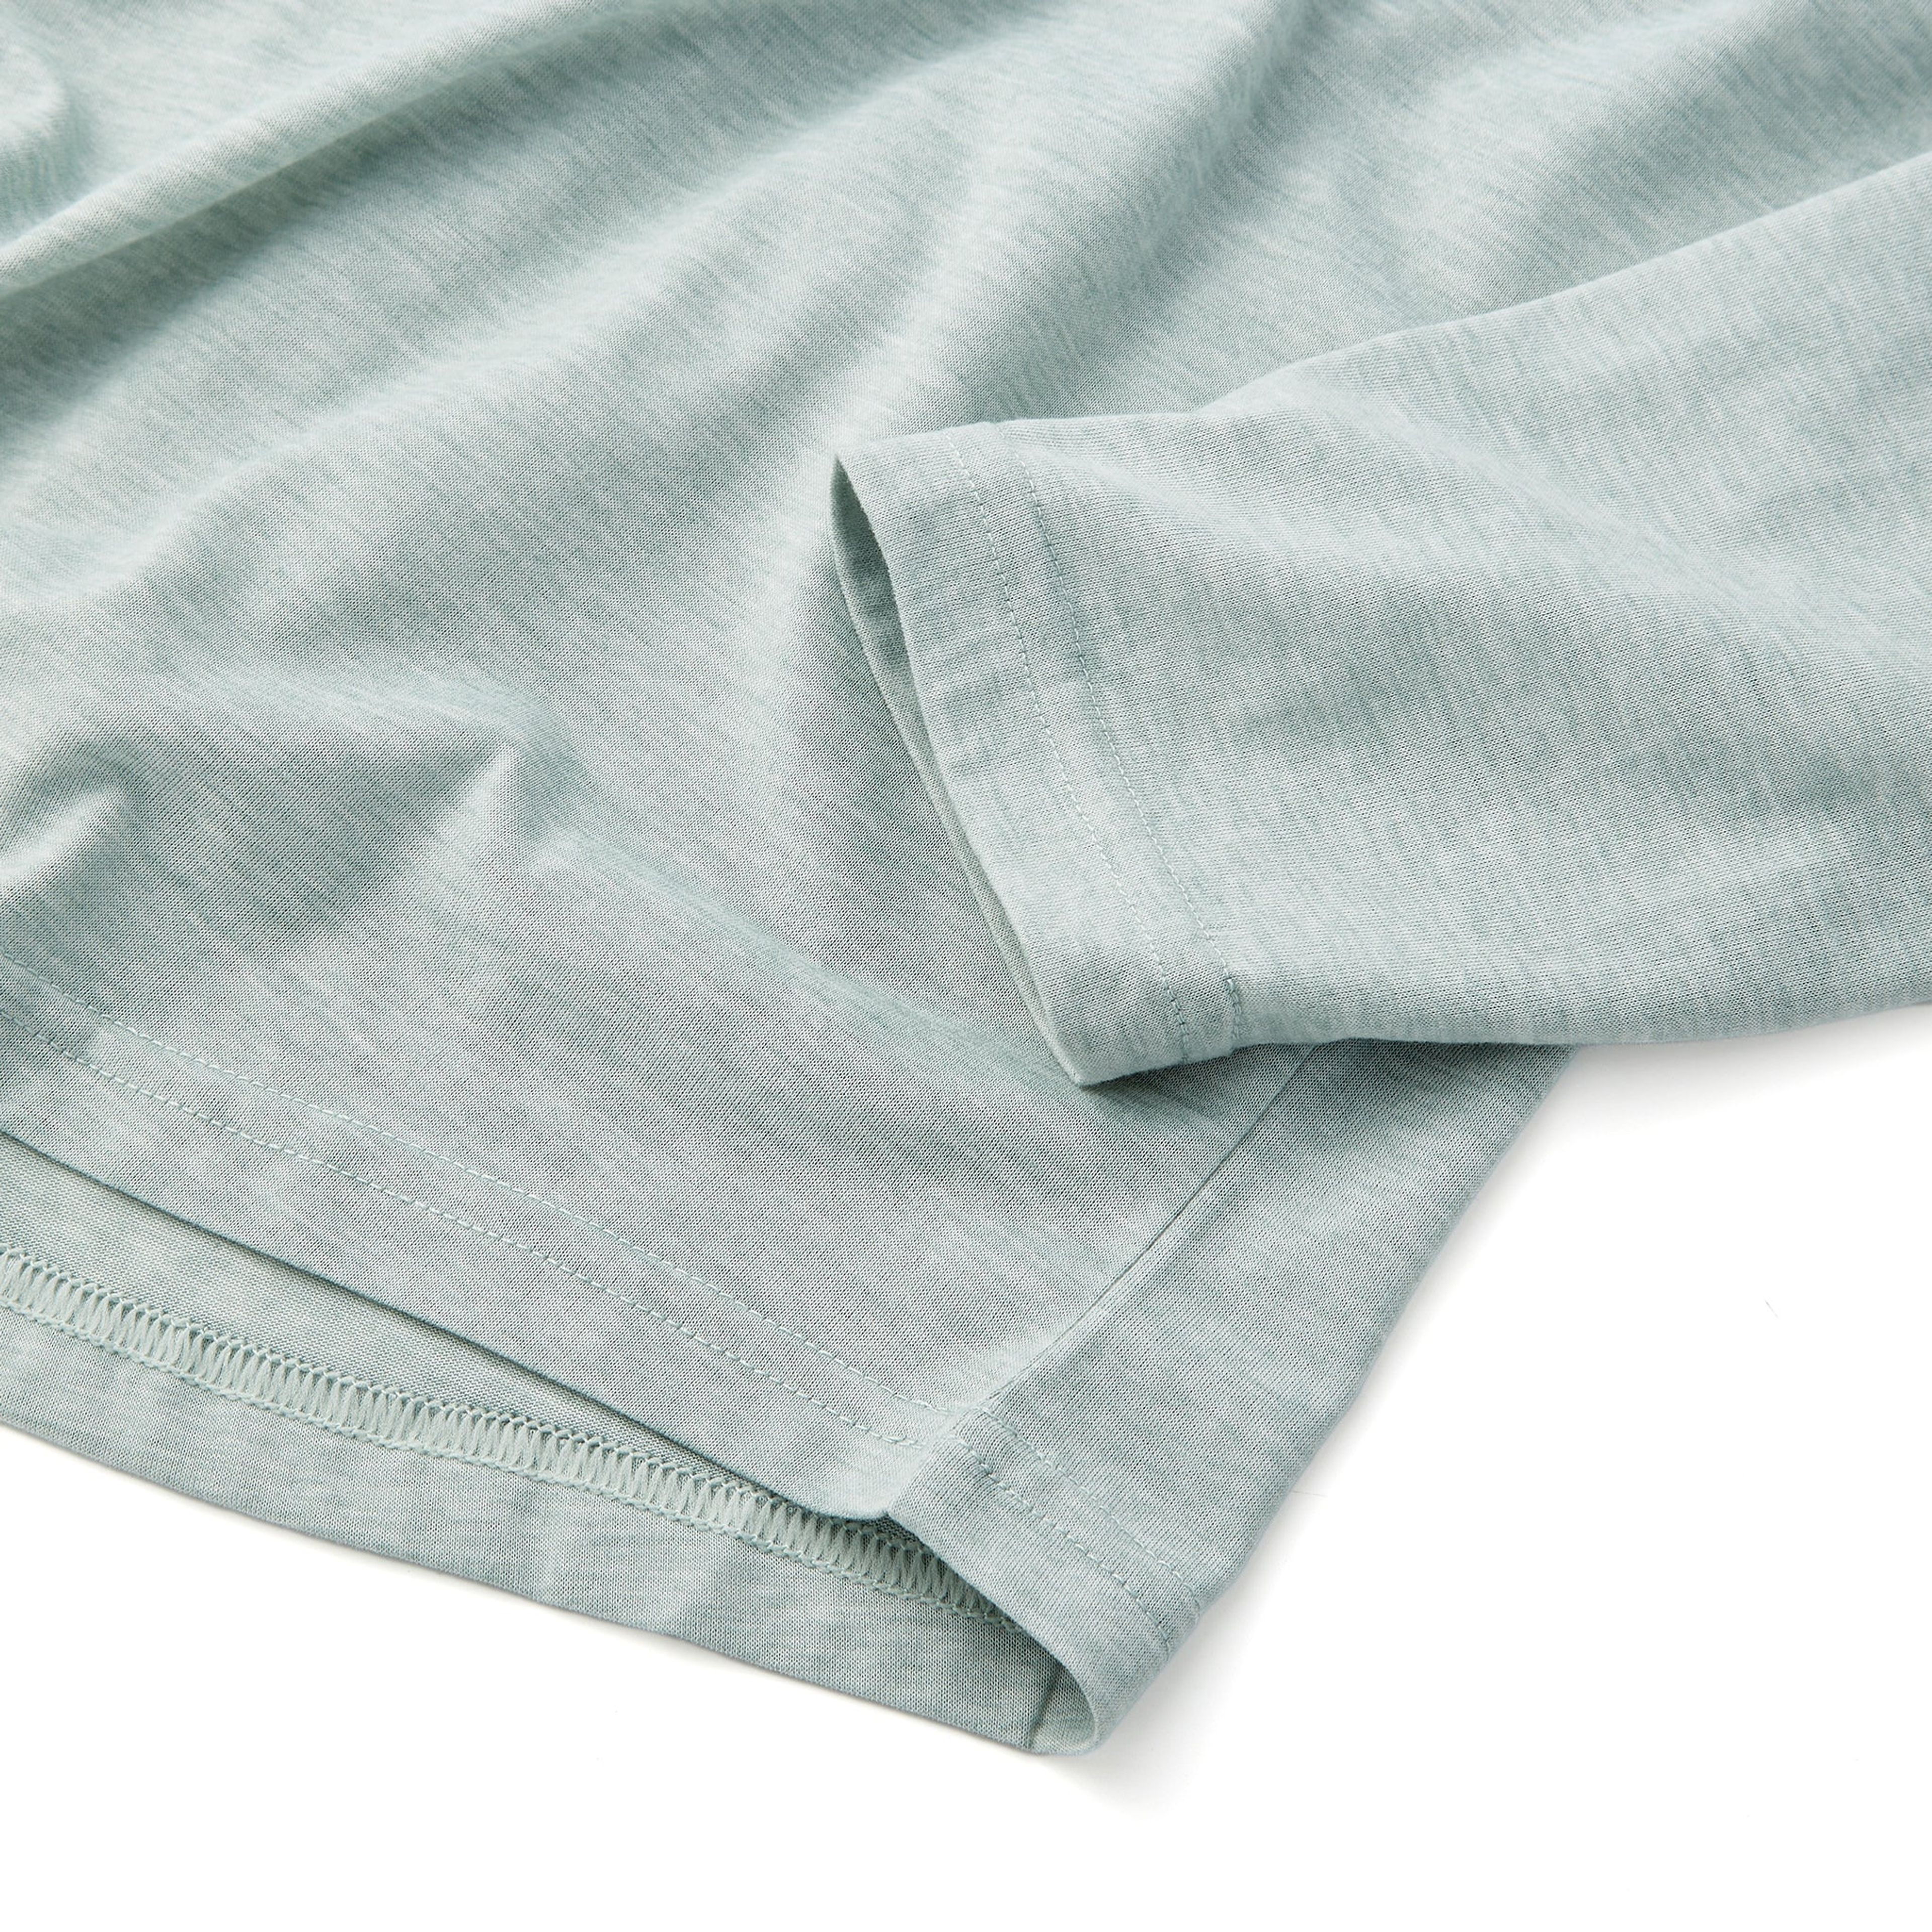 Everyday Long Sleeve Tee with Pocket in Heather Gray Green